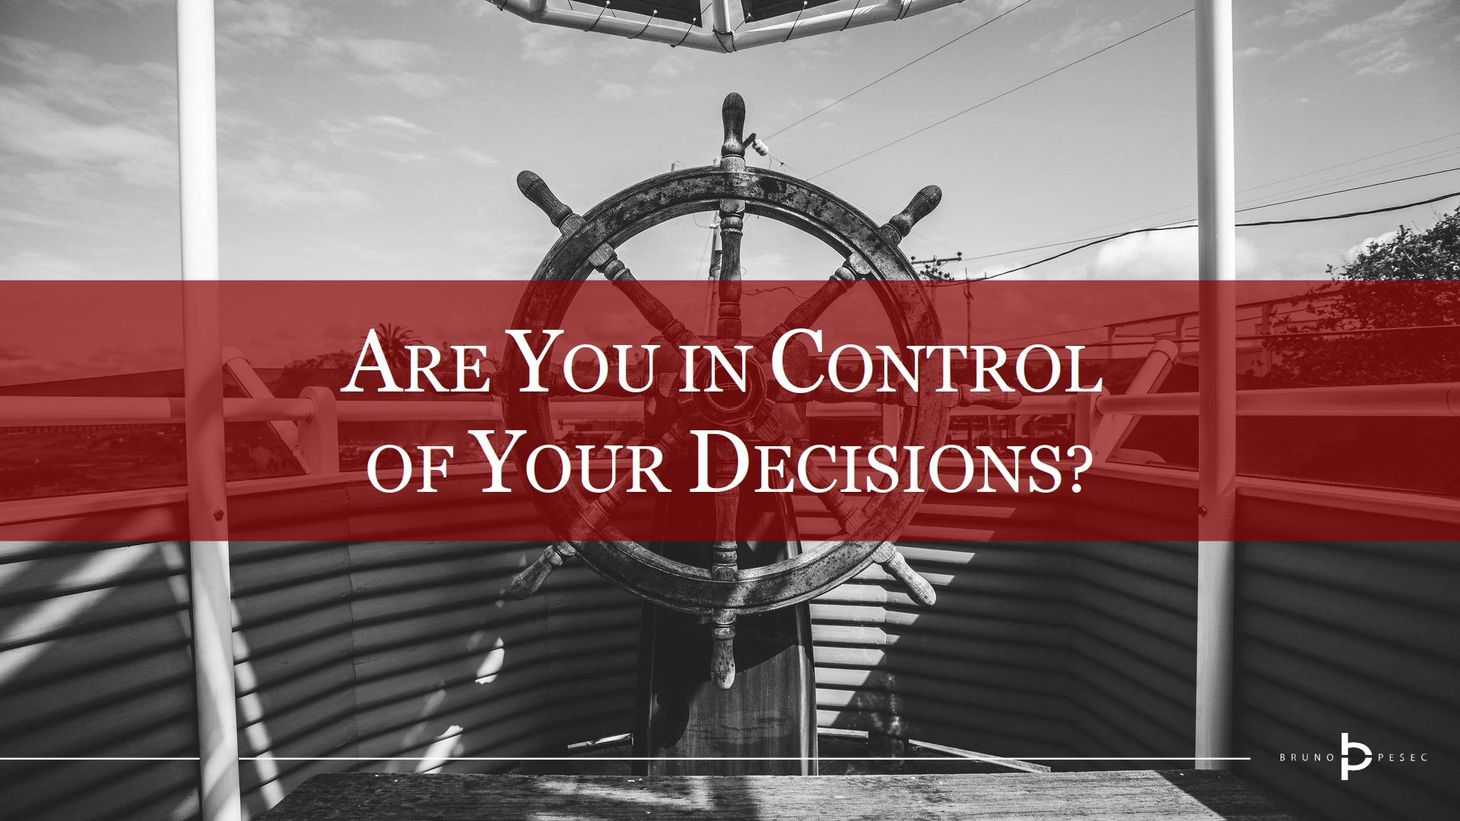 Are you in control of your decisions?